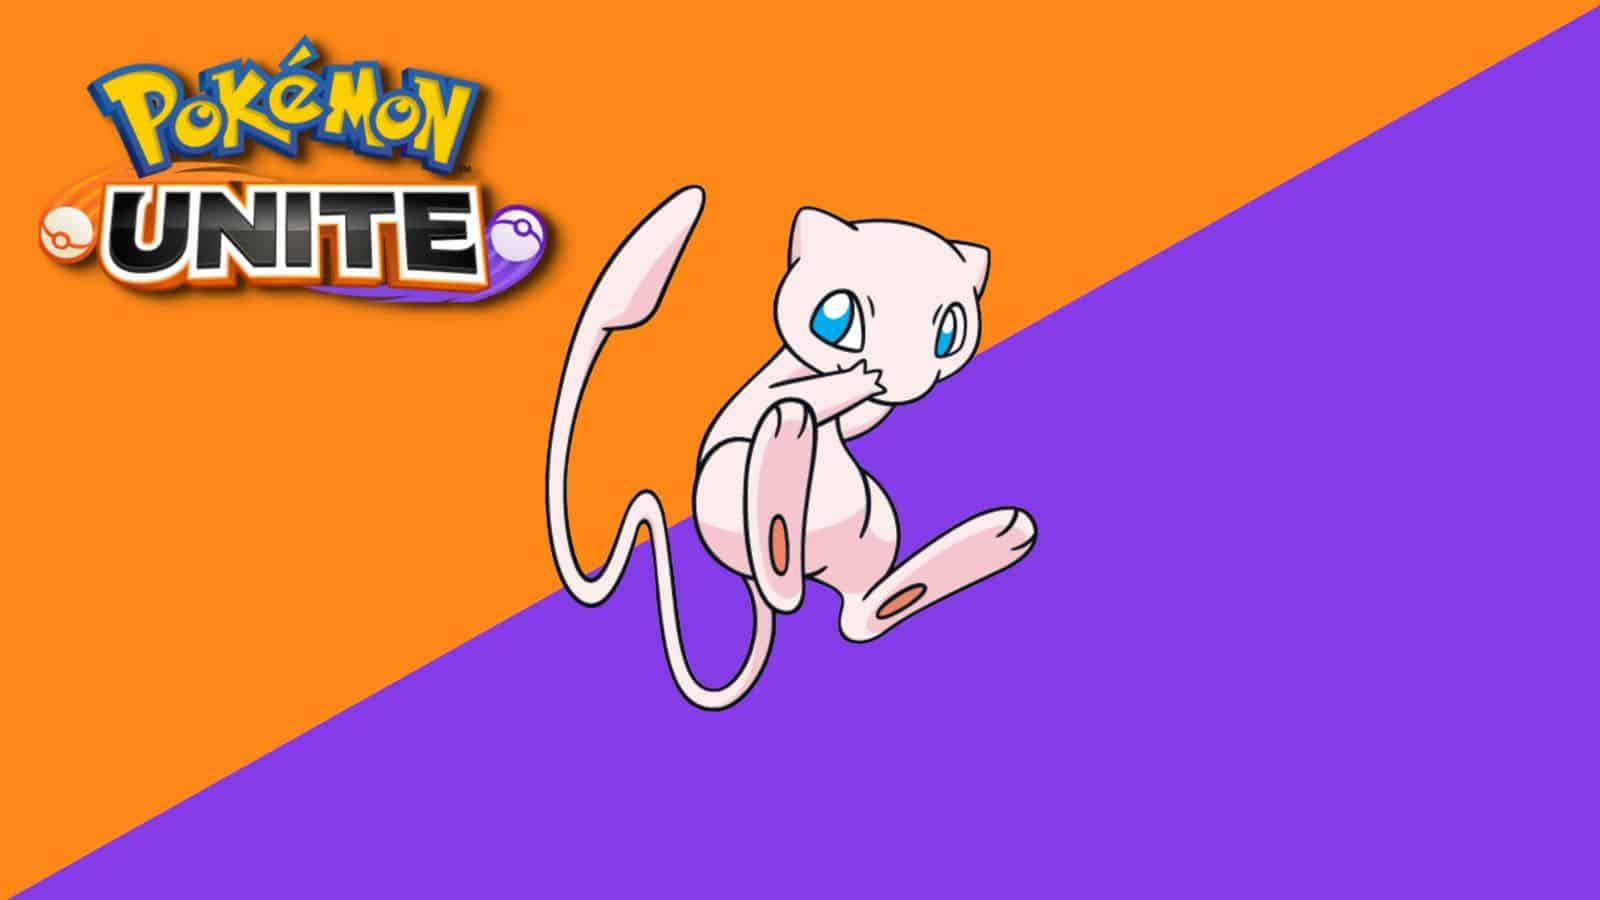 Mew revealed in Pokemon Unite: Moves, stats, release date, guide, build -  Dexerto